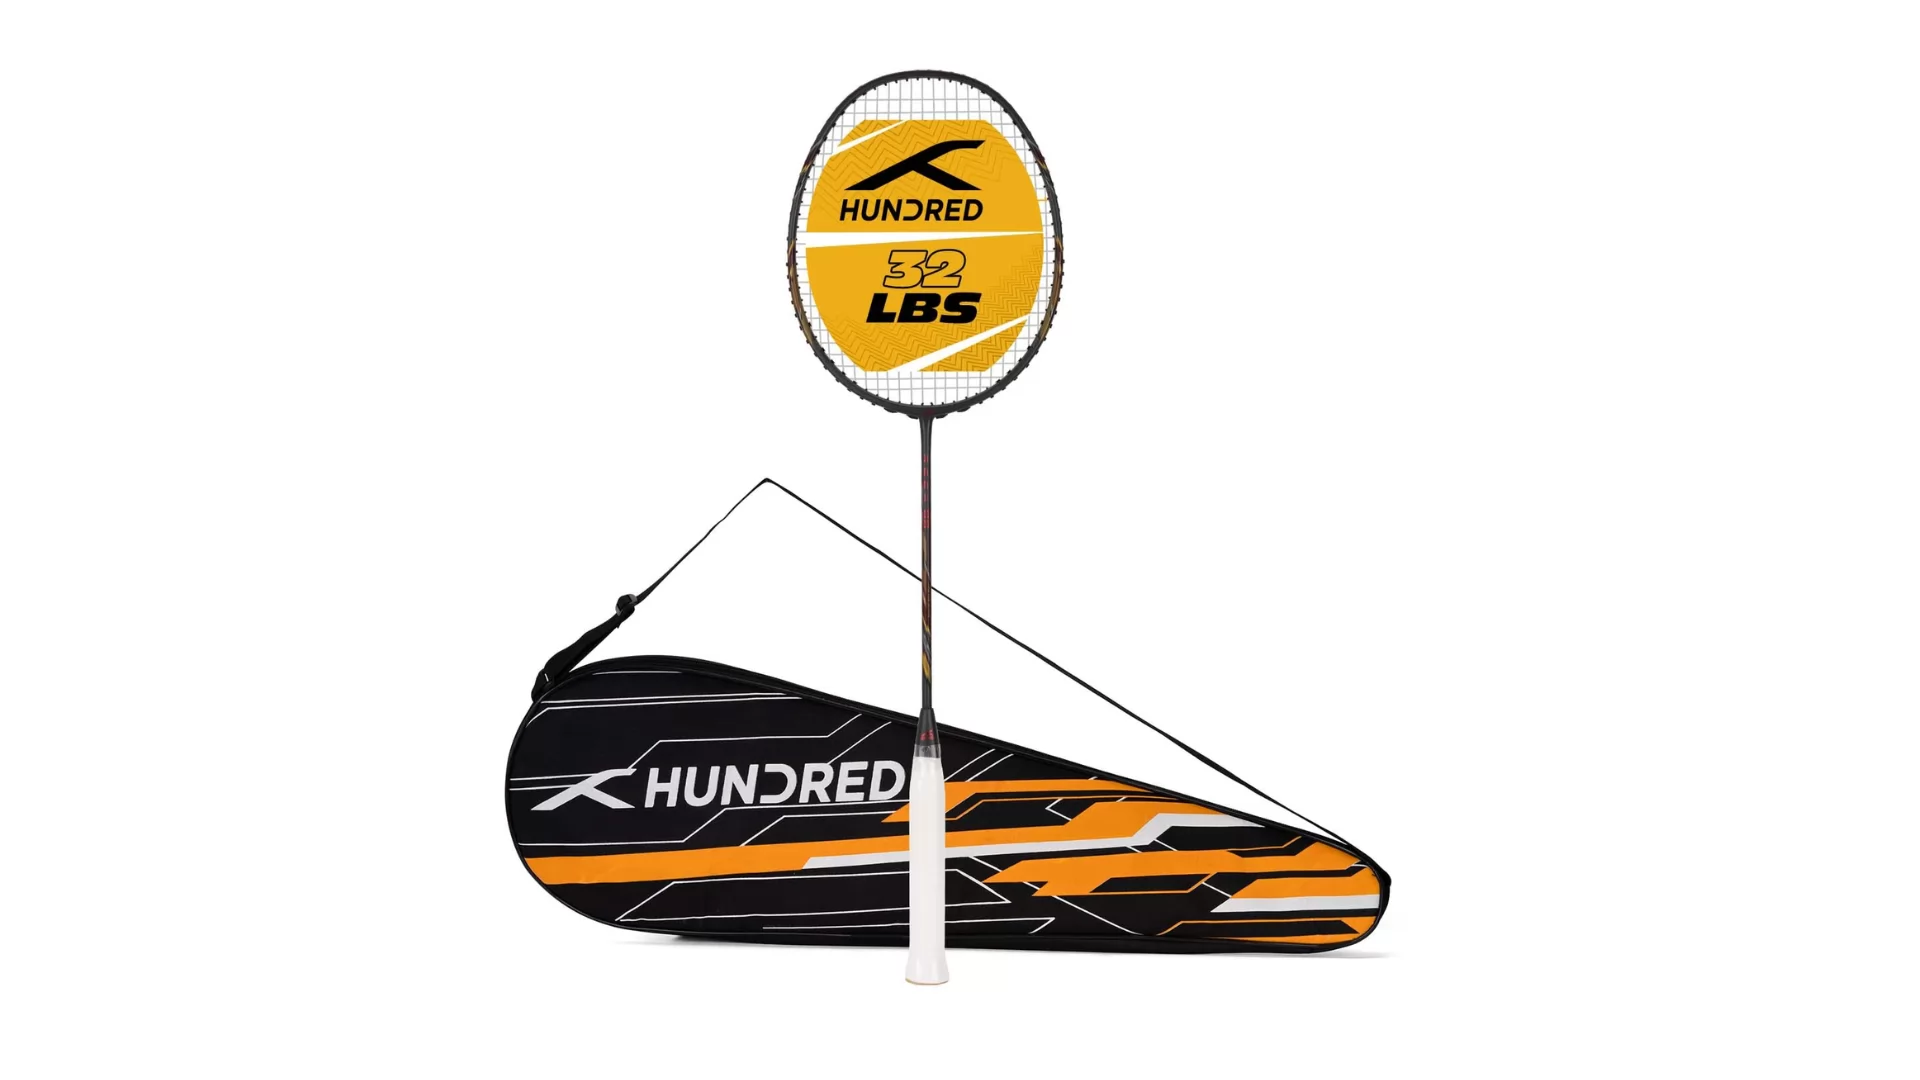 HUNDRED Rock 88 Carbon Fibre Strung Badminton Racket with Full Racket Cover for Intermediate Players